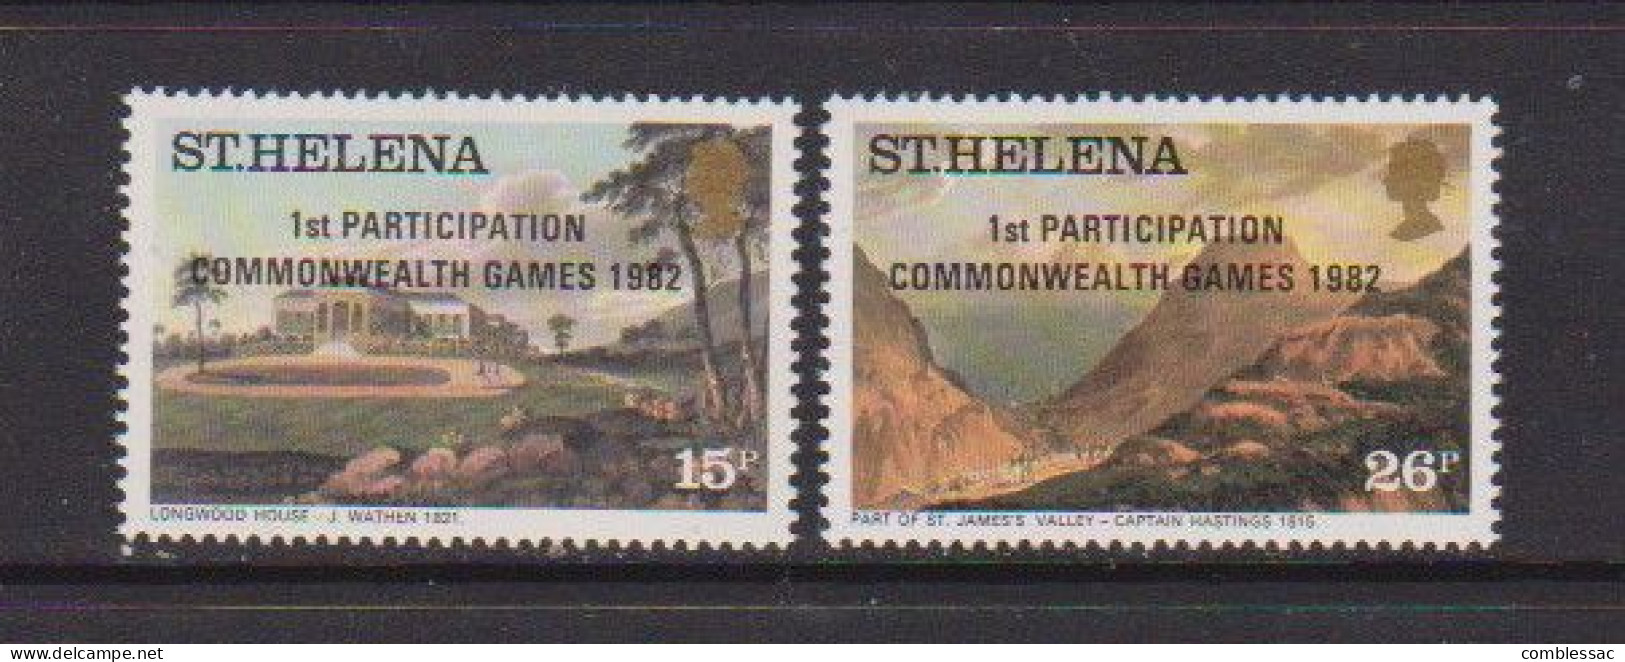 SAINT HELENA    1982    Opt  1st  Partisipation  In  Commonwealth  Games    Set  Of  4     MH - Saint Helena Island